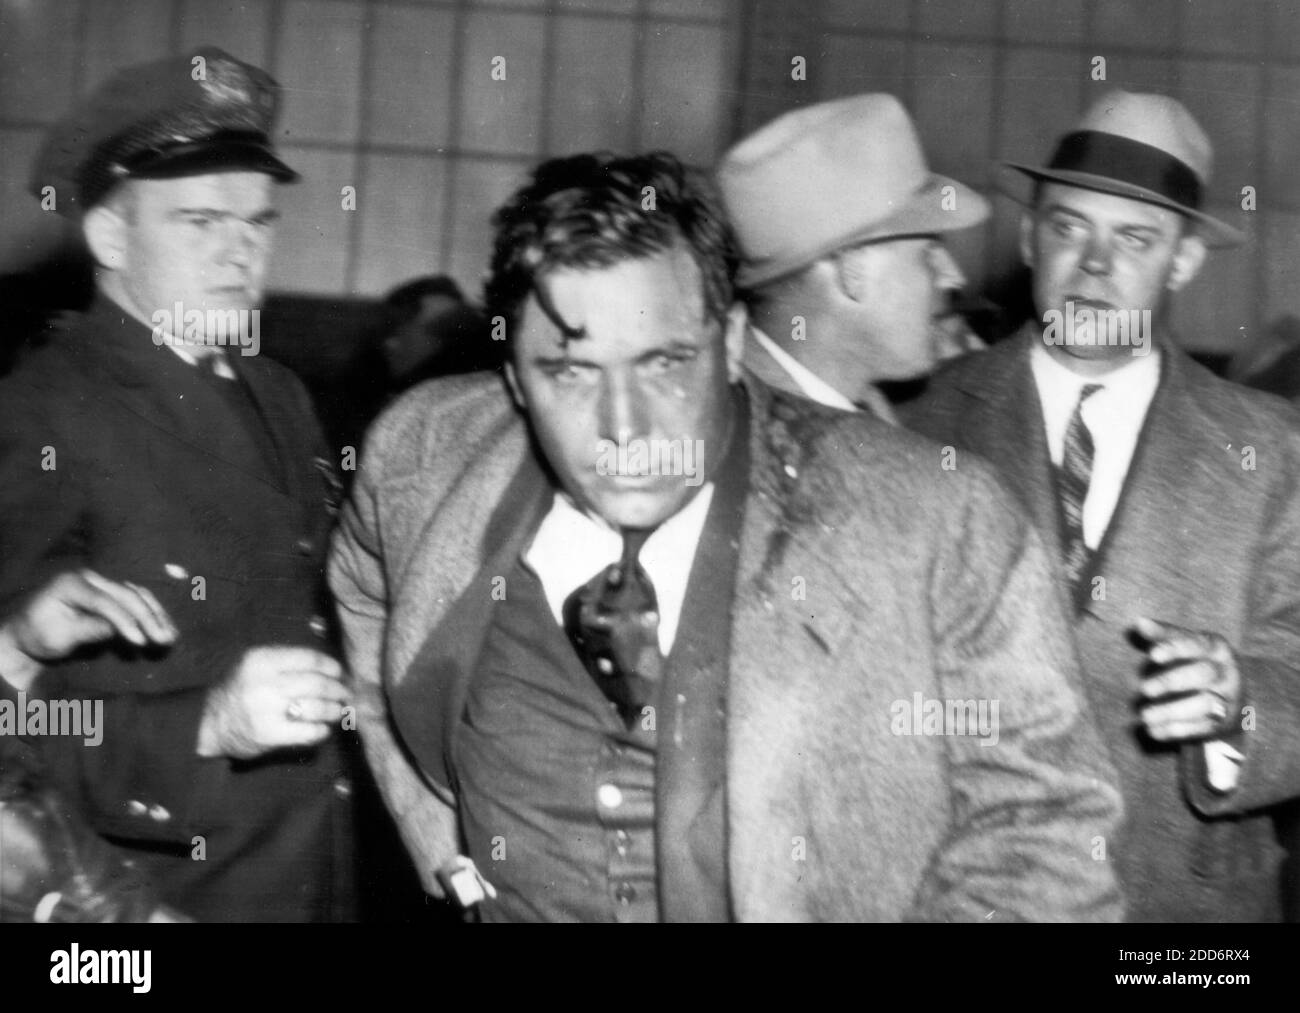 In the 1940 Presidential campaign, Republican candidate Wendell Willkie was hit in the head by an egg at the Chicago train station. This action shot photo's caption is; 'Wendell Willkie ... reaches for a handkerchief Oct. 22 in Chicago after he had been hit near the left temple by an egg as he was about to board a train. Charles Mulrain, 53, admitted in police court that he bought two eggs, but said he could not recall throwing them. Mulrain was charged with breach of the peace and assault with a deadly weapon.'    To see my other politics-related images, Search:  Prestor  vintage  politics Stock Photo